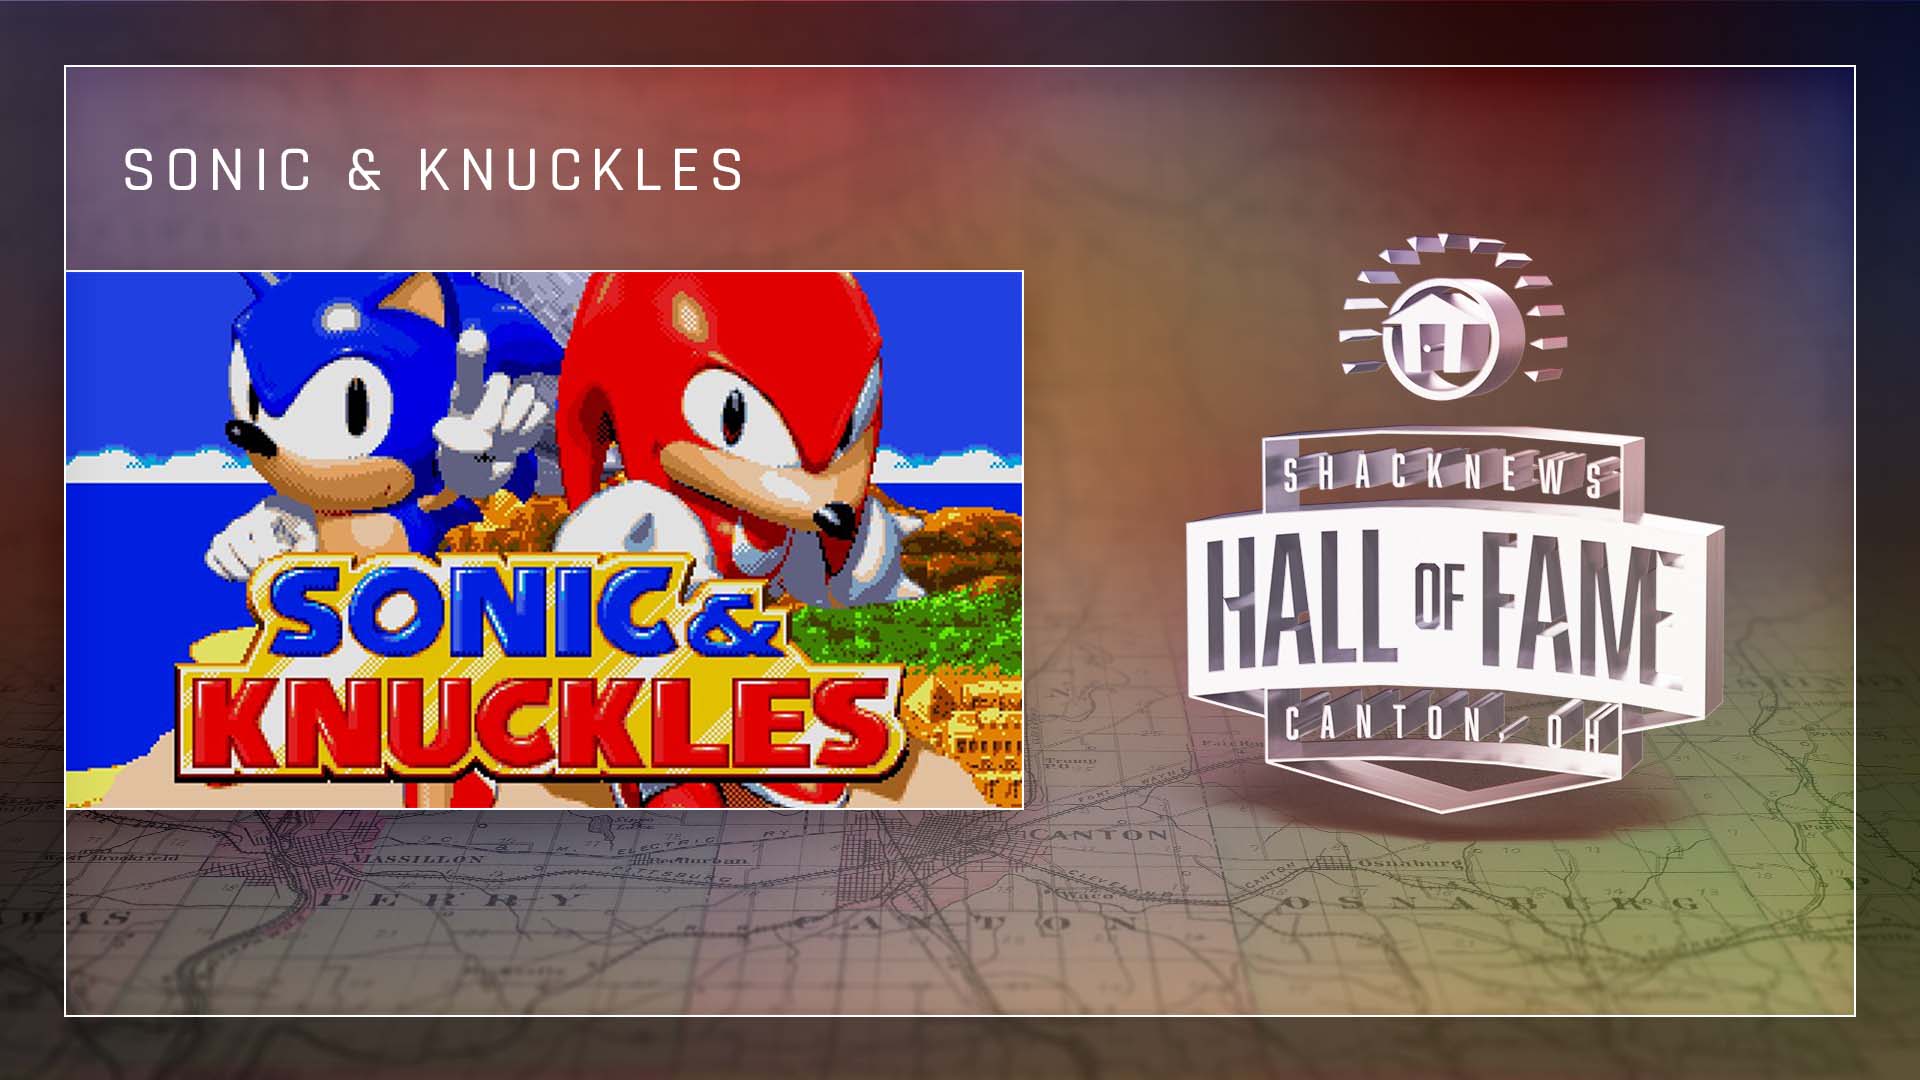 Sonic & Knuckles.